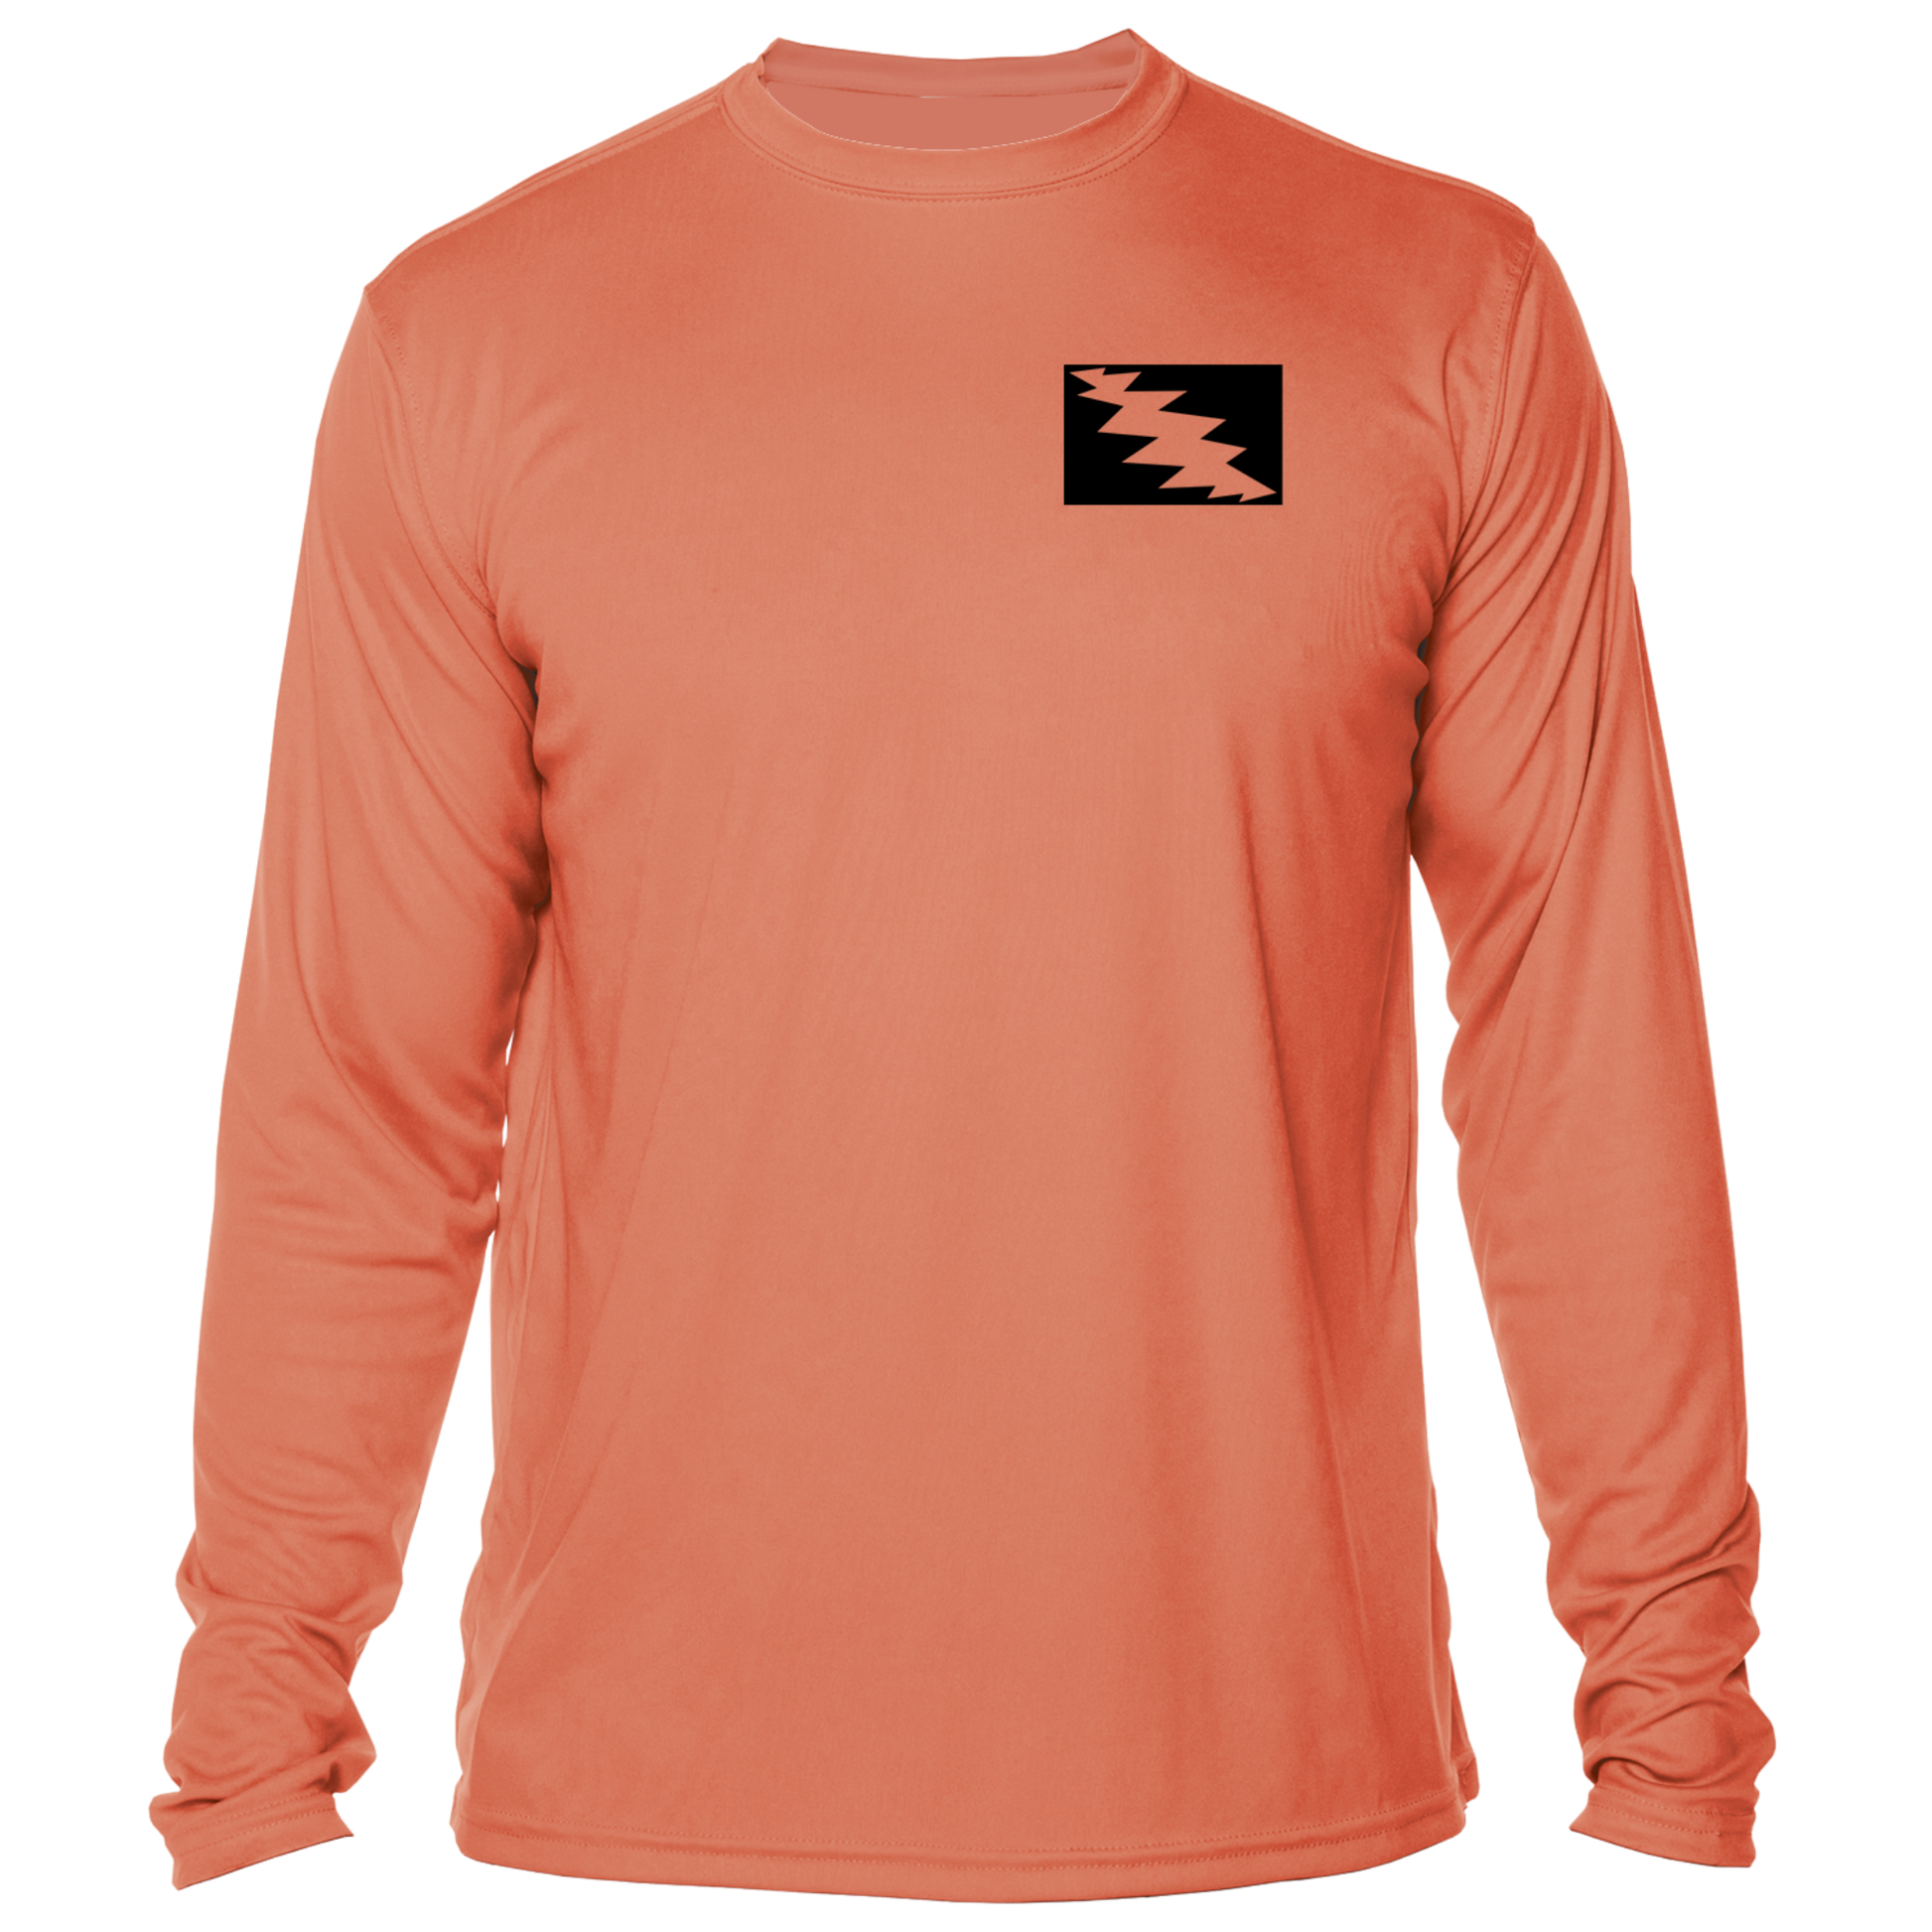 Grateful Diver Palm Tree UV Shirt in salmon showing the front off figure